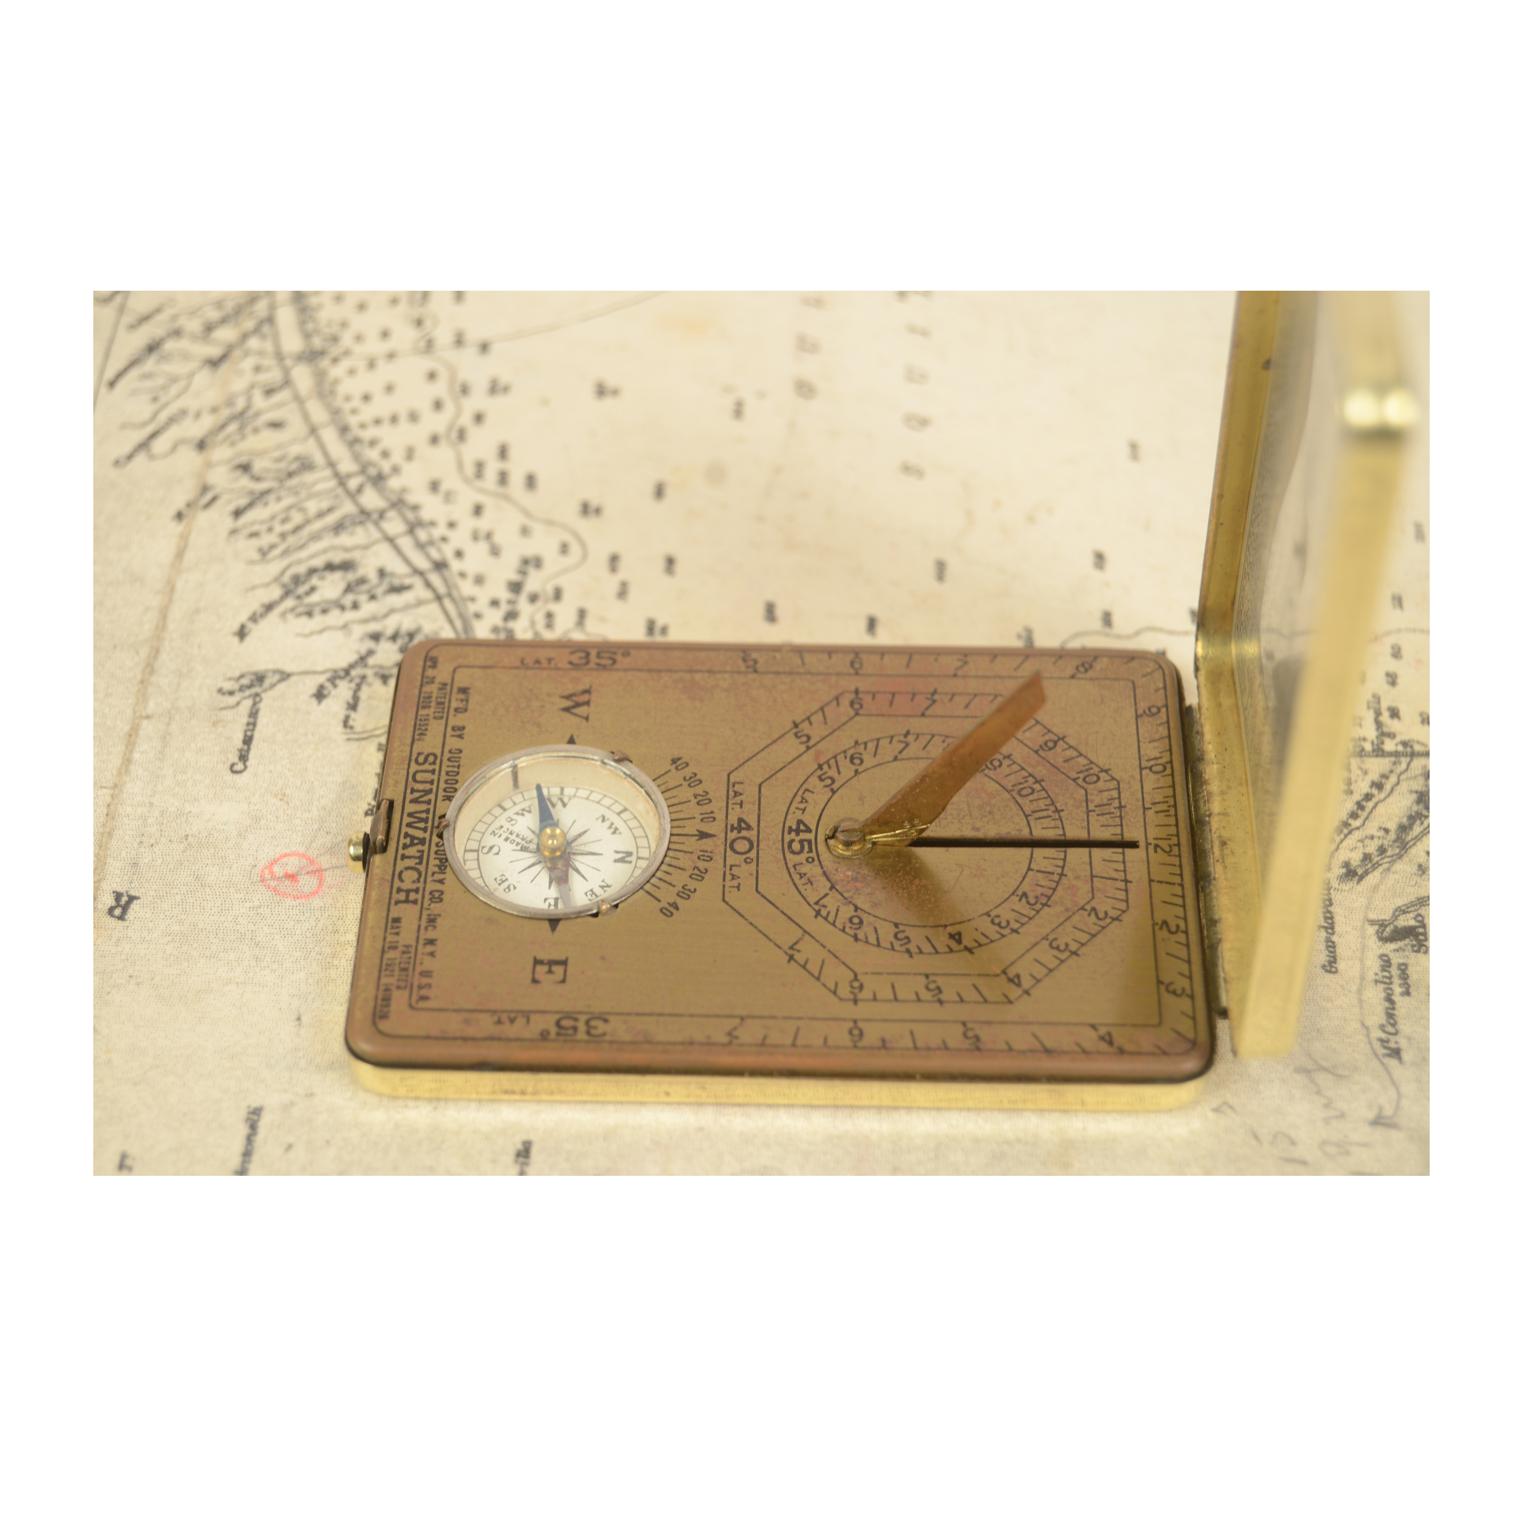 1921 Antique Brass Sundial Compass Signed  Outdoor Supply Co. Inc. N.Y. USA 1